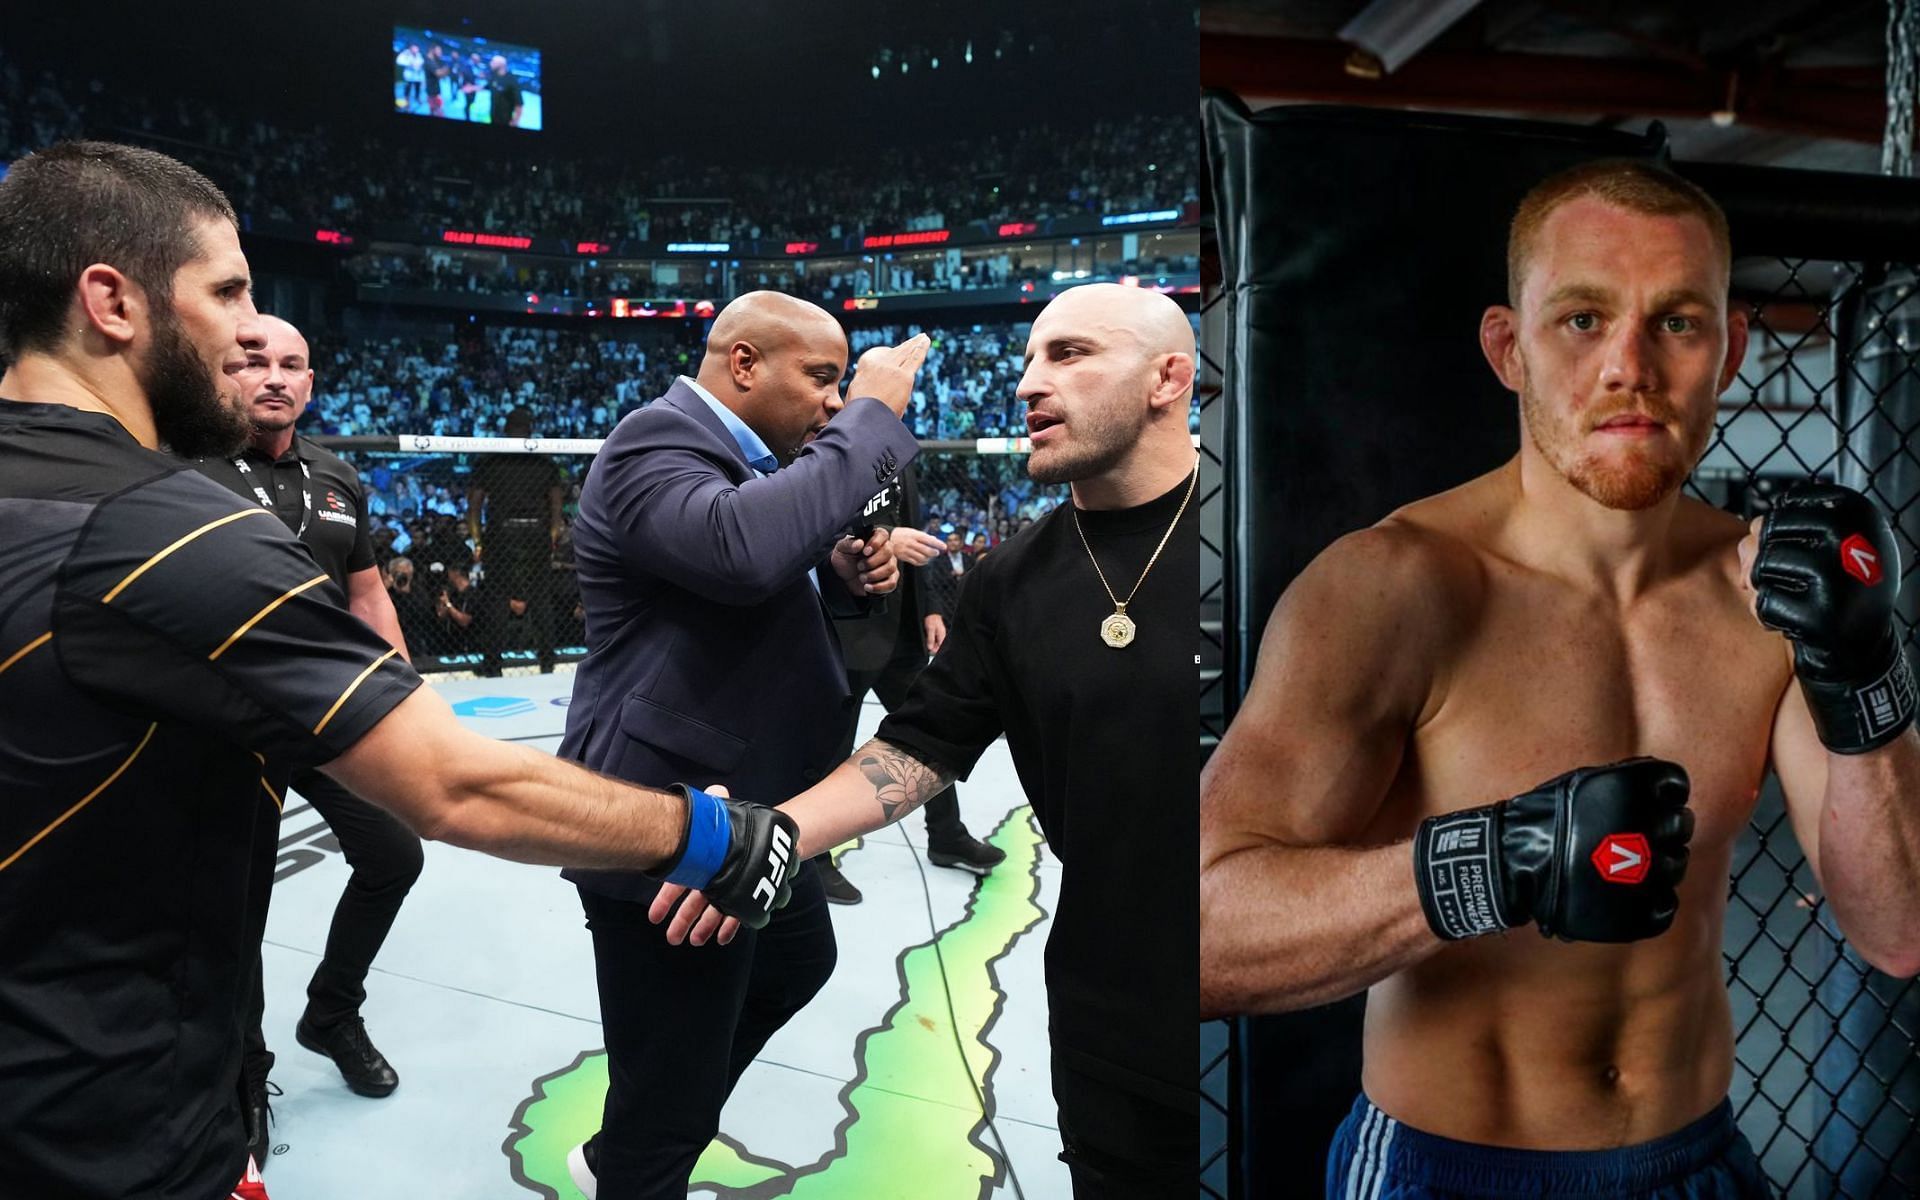 Islam Makhachev and Alexander Volkanovski (left) and Jack Della Maddalena (right). [Images courtesy: left image from Chris Unger/Zuffa LLC and right image from The West Australian]